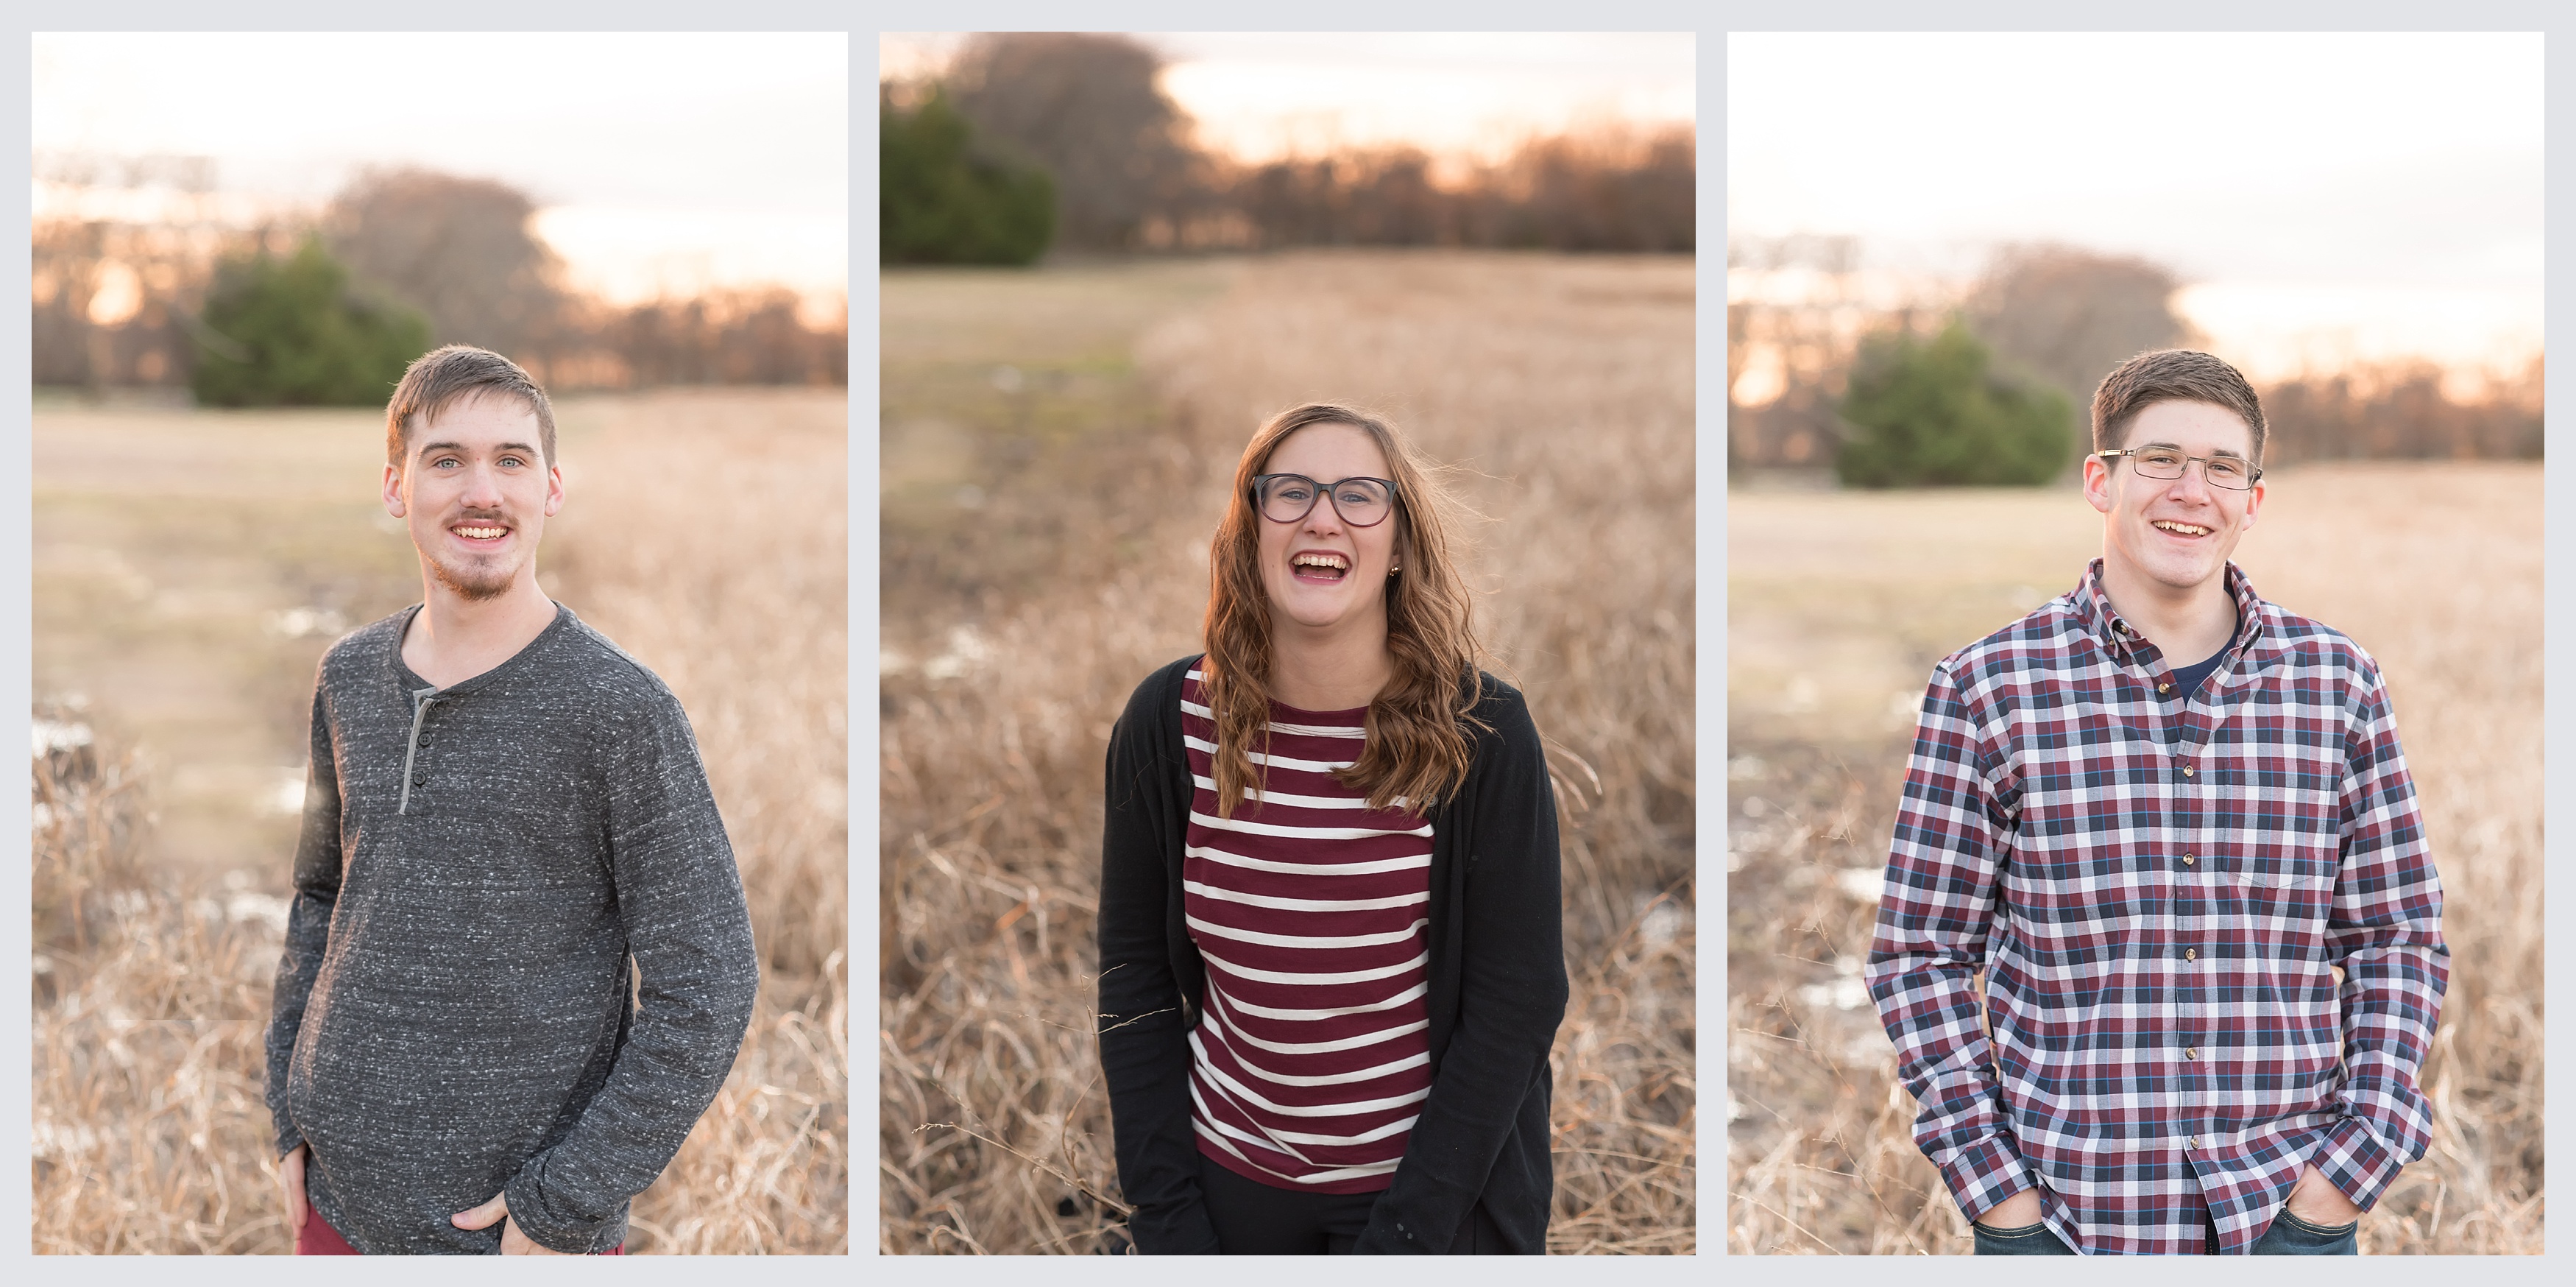 Sometimes you just meet people that you know you're going to click with right off the bat. That's how I felt as soon as I started to photograph the Causey family. I had THE MOST fun creating memories for this AWESOME family! 